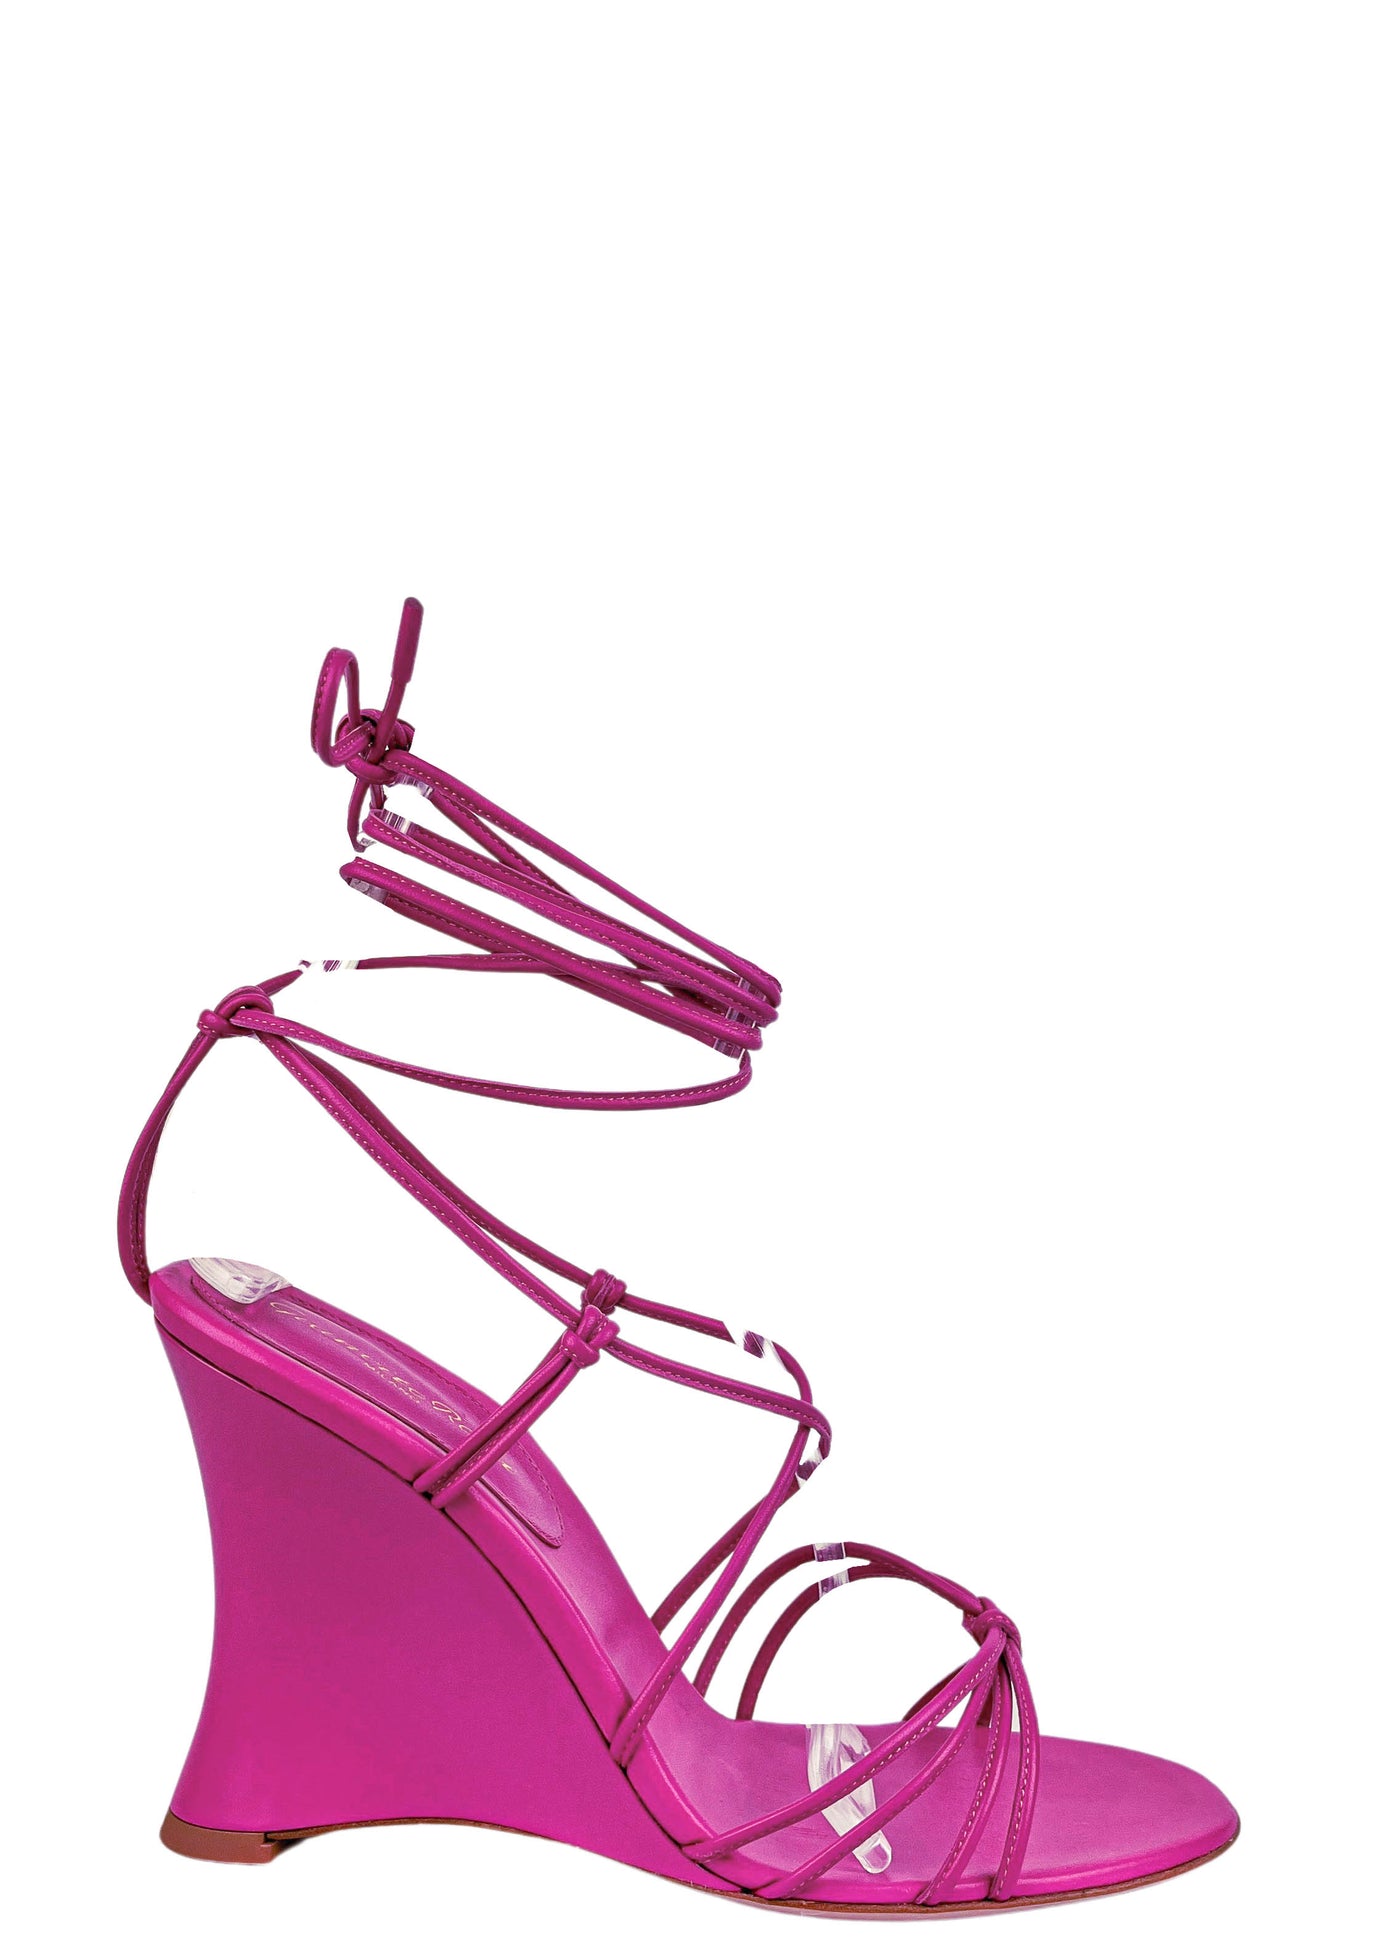 Gianvito Rossi Strappy Wedge Sandals in Bloom - Discounts on Gianvito Rossi at UAL